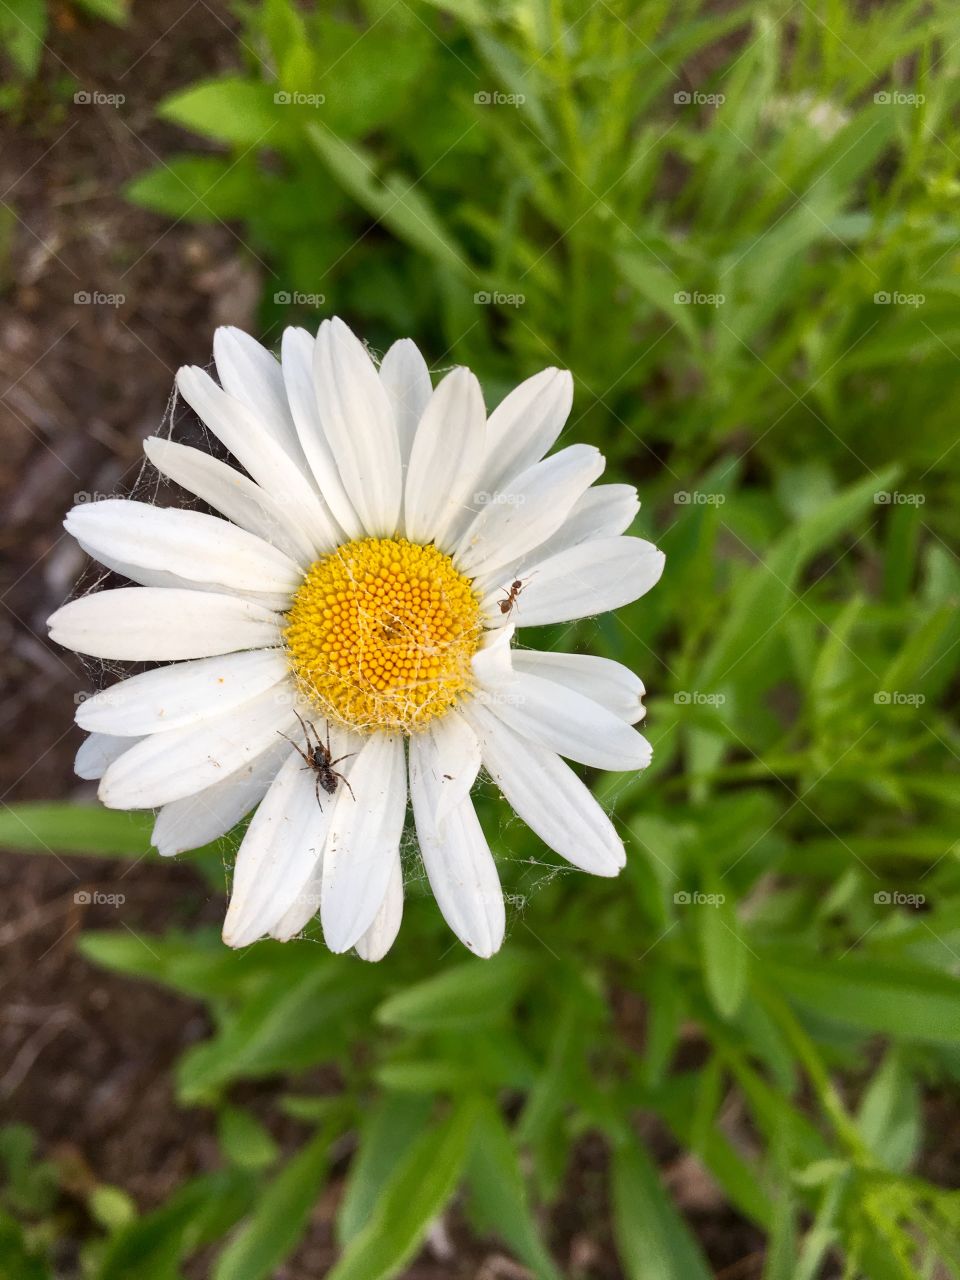 Spider finds home on a Shasta Daisy with an ant visitor